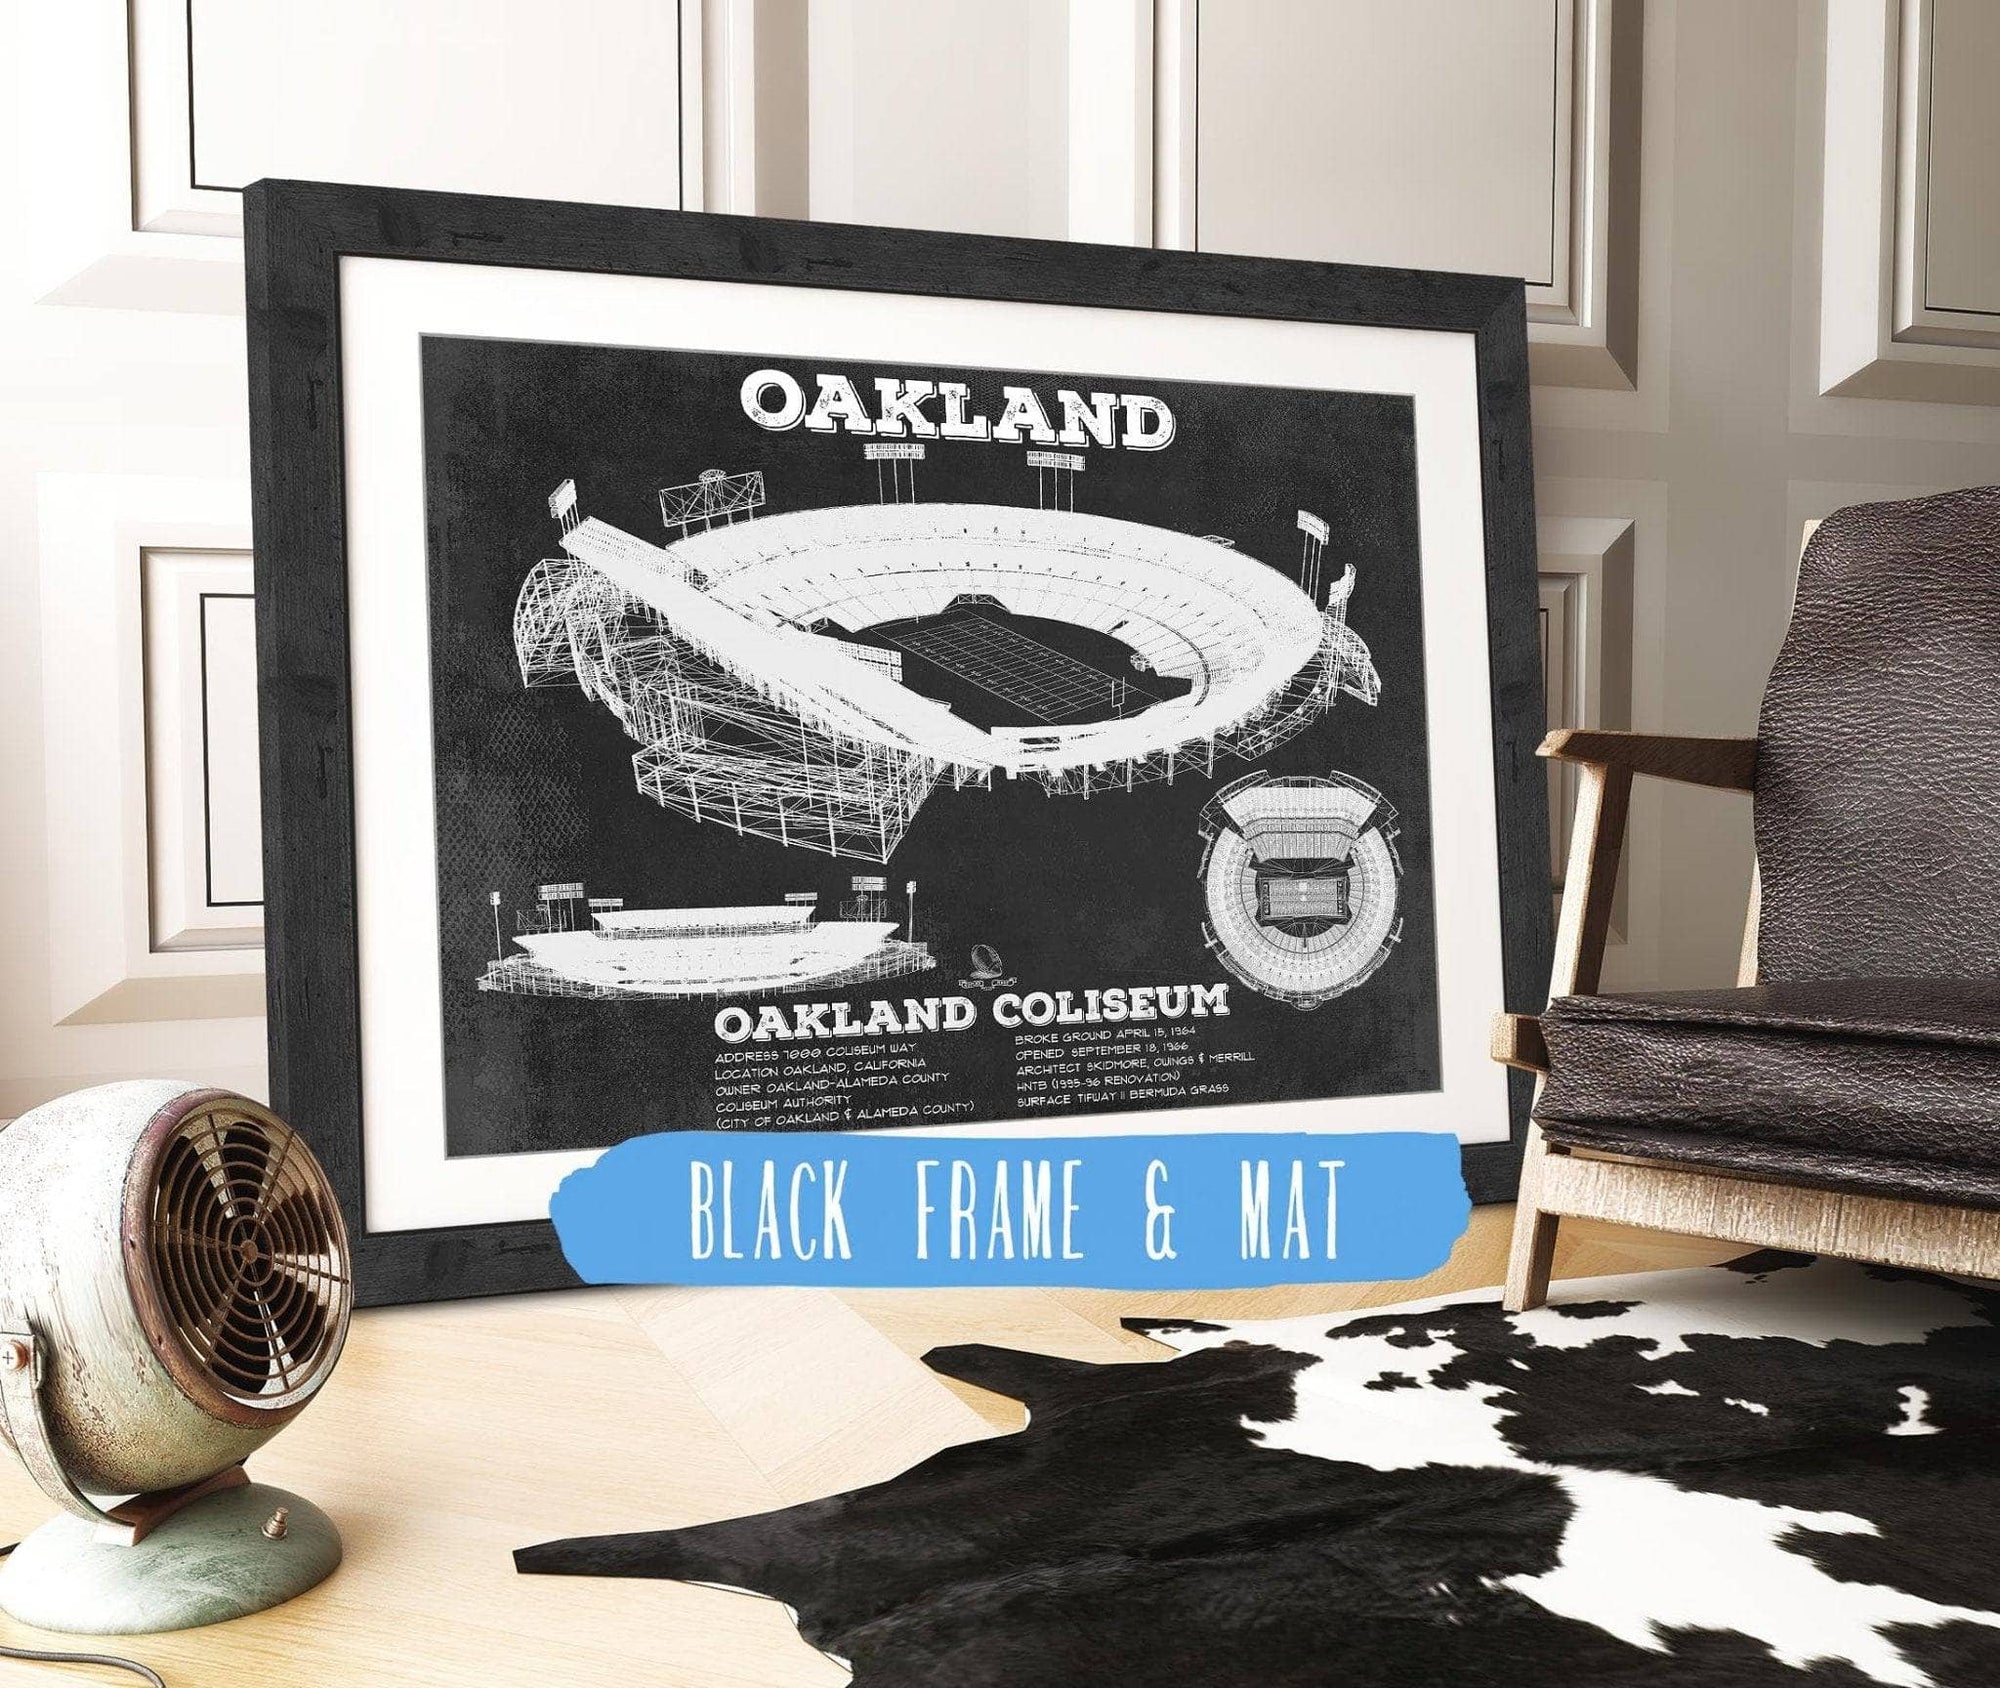 Cutler West Pro Football Collection 14" x 11" / Black Frame & Mat Oakland Raiders Team Color Alameda County Coliseum Seating Chart - Vintage Football Print 920787395-TOP_70495